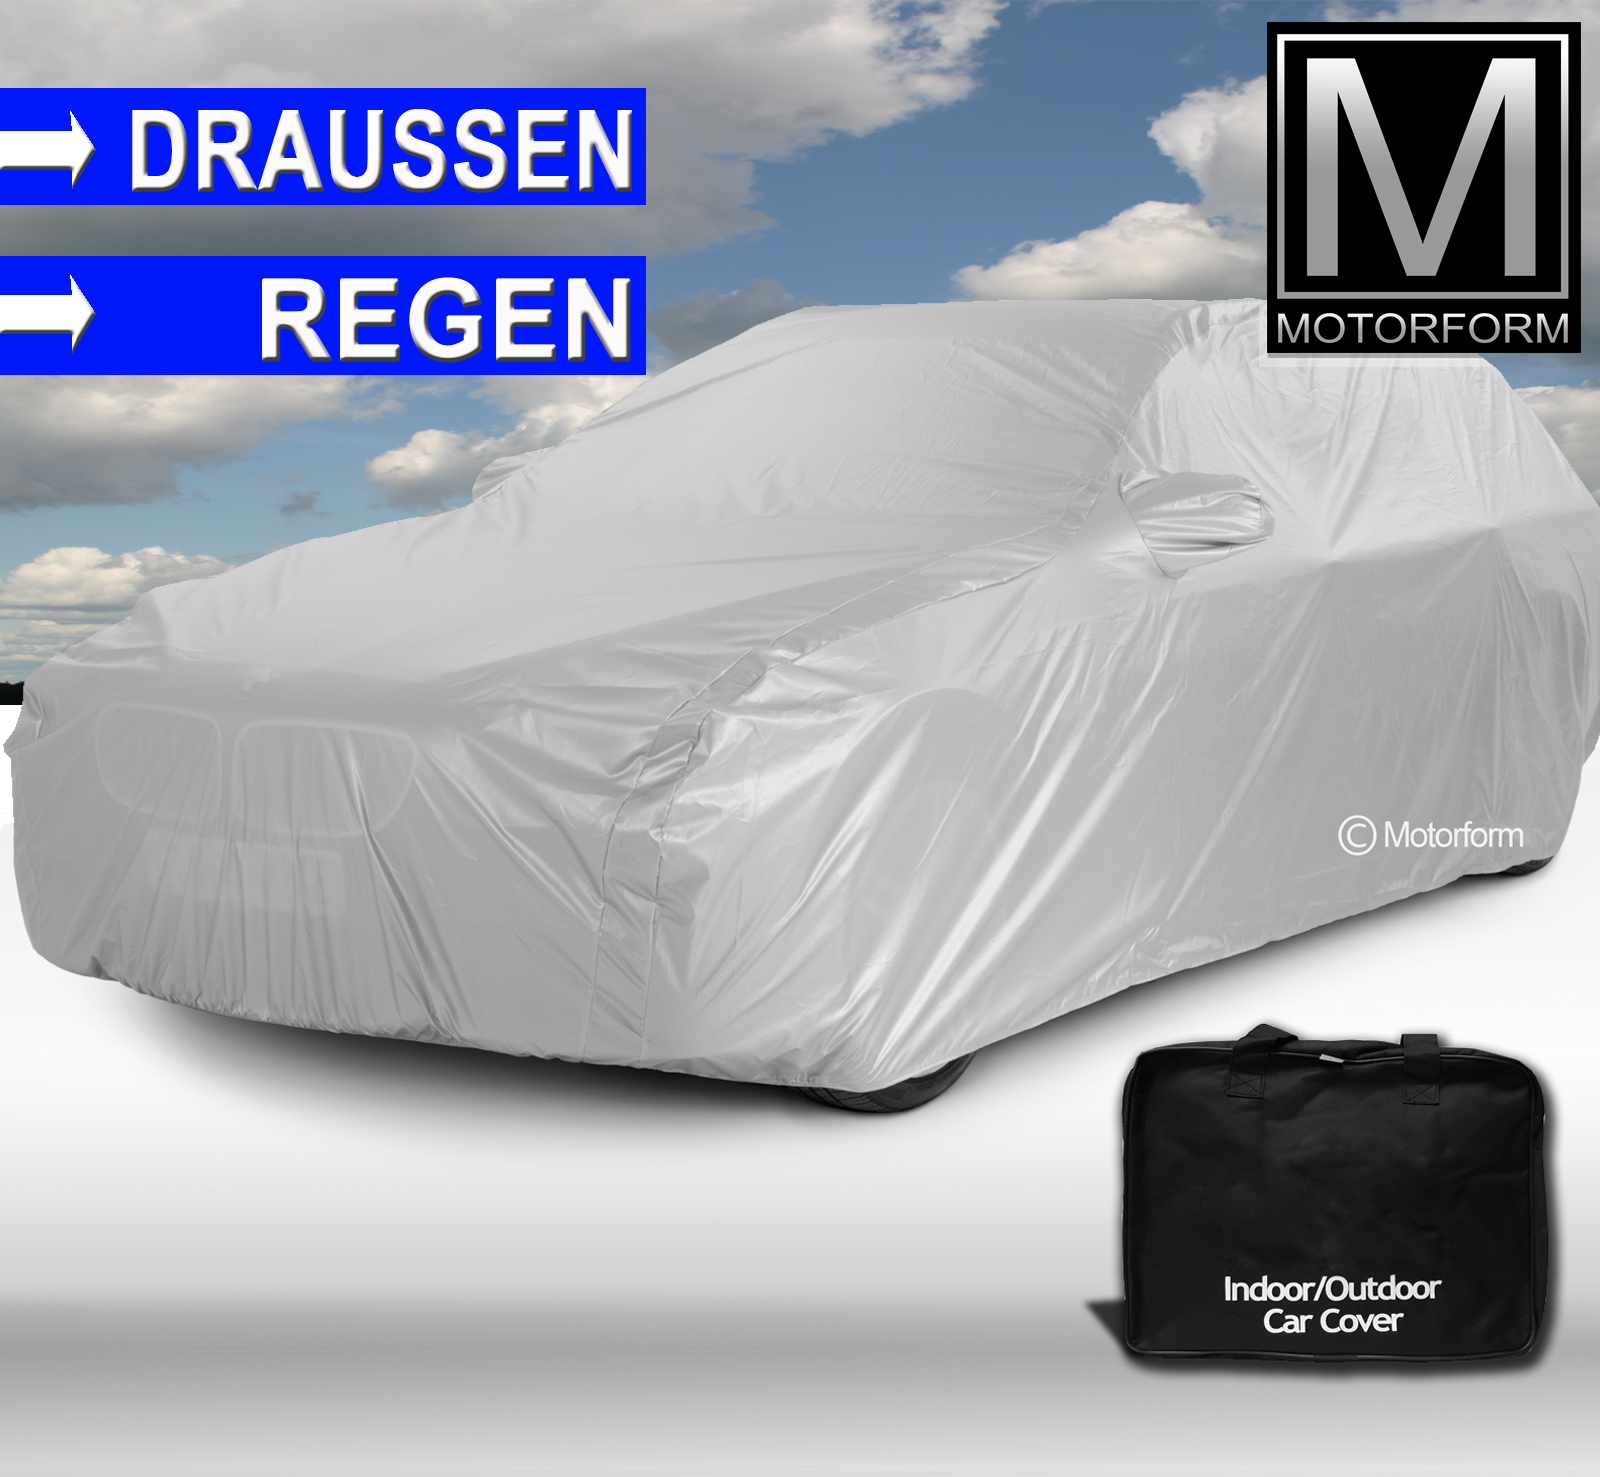 Voyager Outdoor Car Cover for Mercedes C-Class W203 Estate (2001